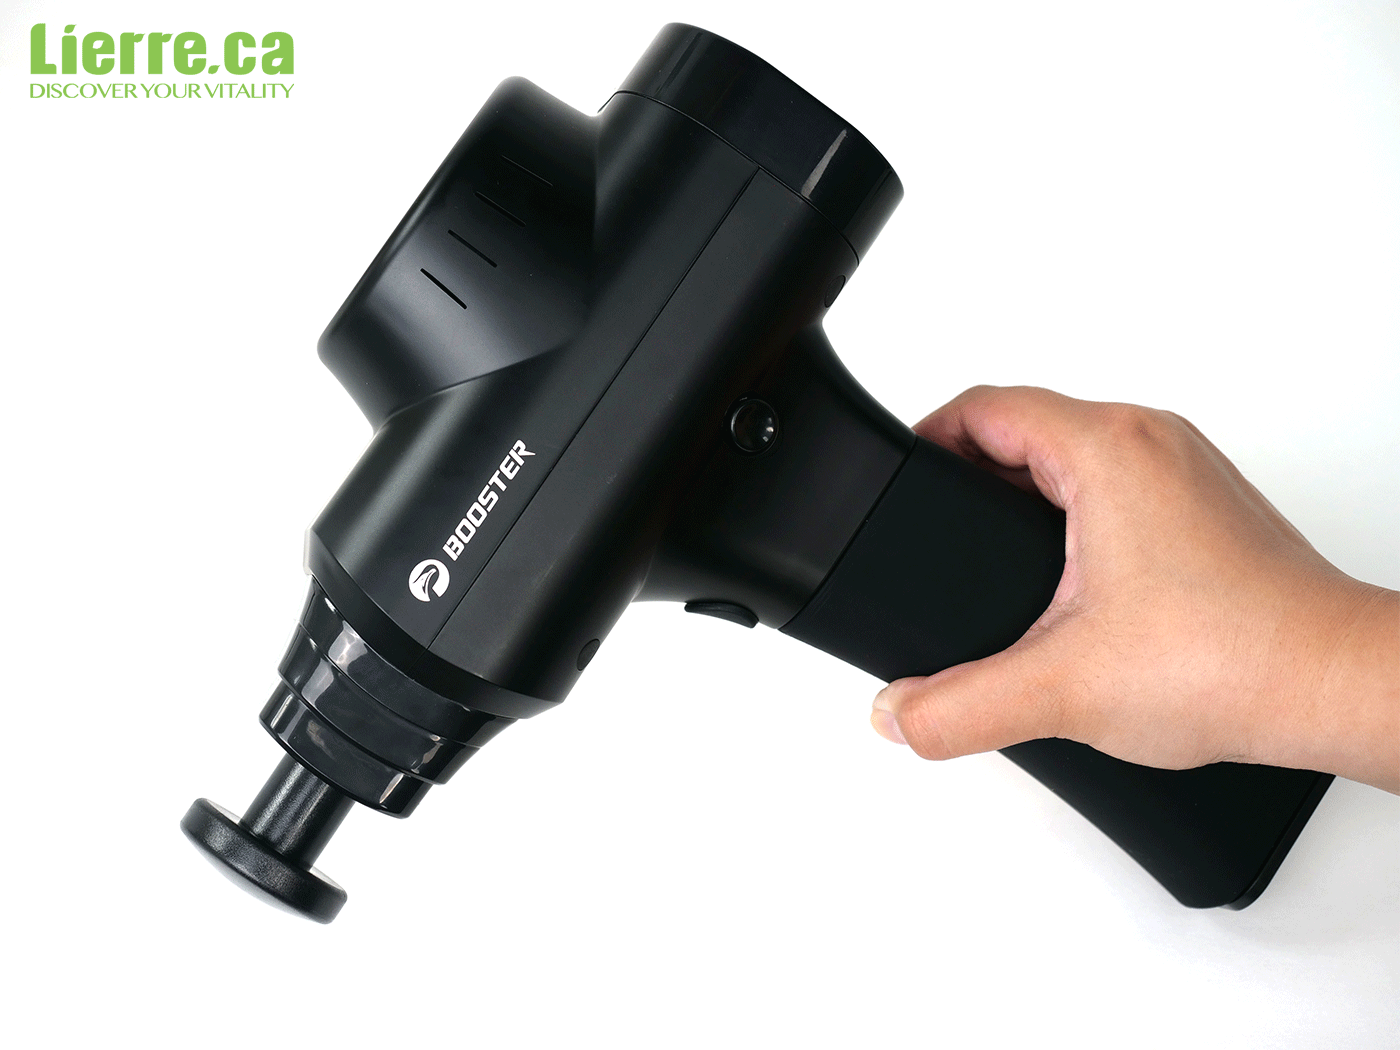 Booster 2X Percussion Therapy Massage Gun from Lierre.ca in Canada - Black Friday Blowout deals